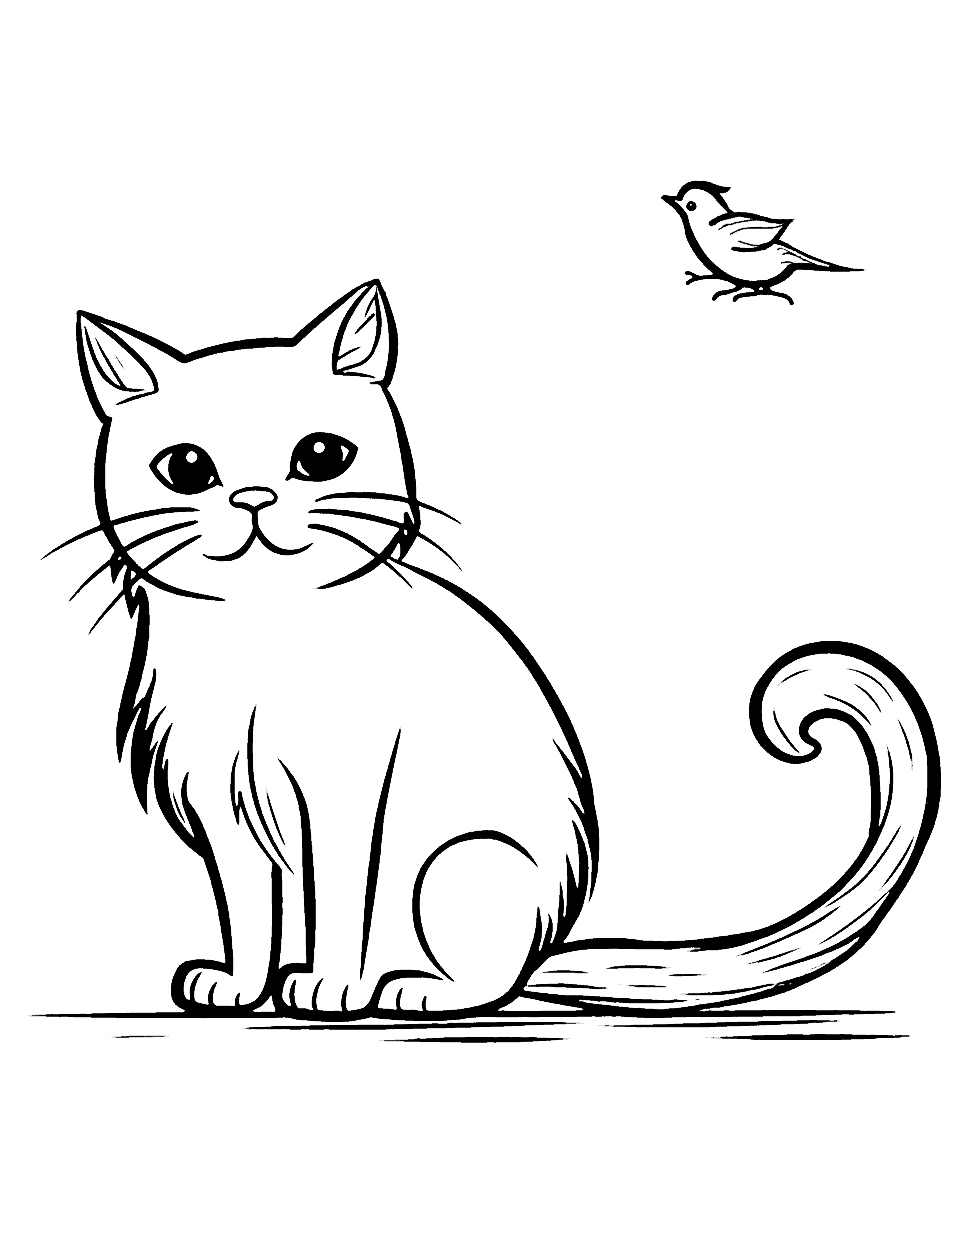 Easy Cat and a Bird Coloring Page - A simple coloring page of a cat and a bird sitting side by side, perfect for beginners.